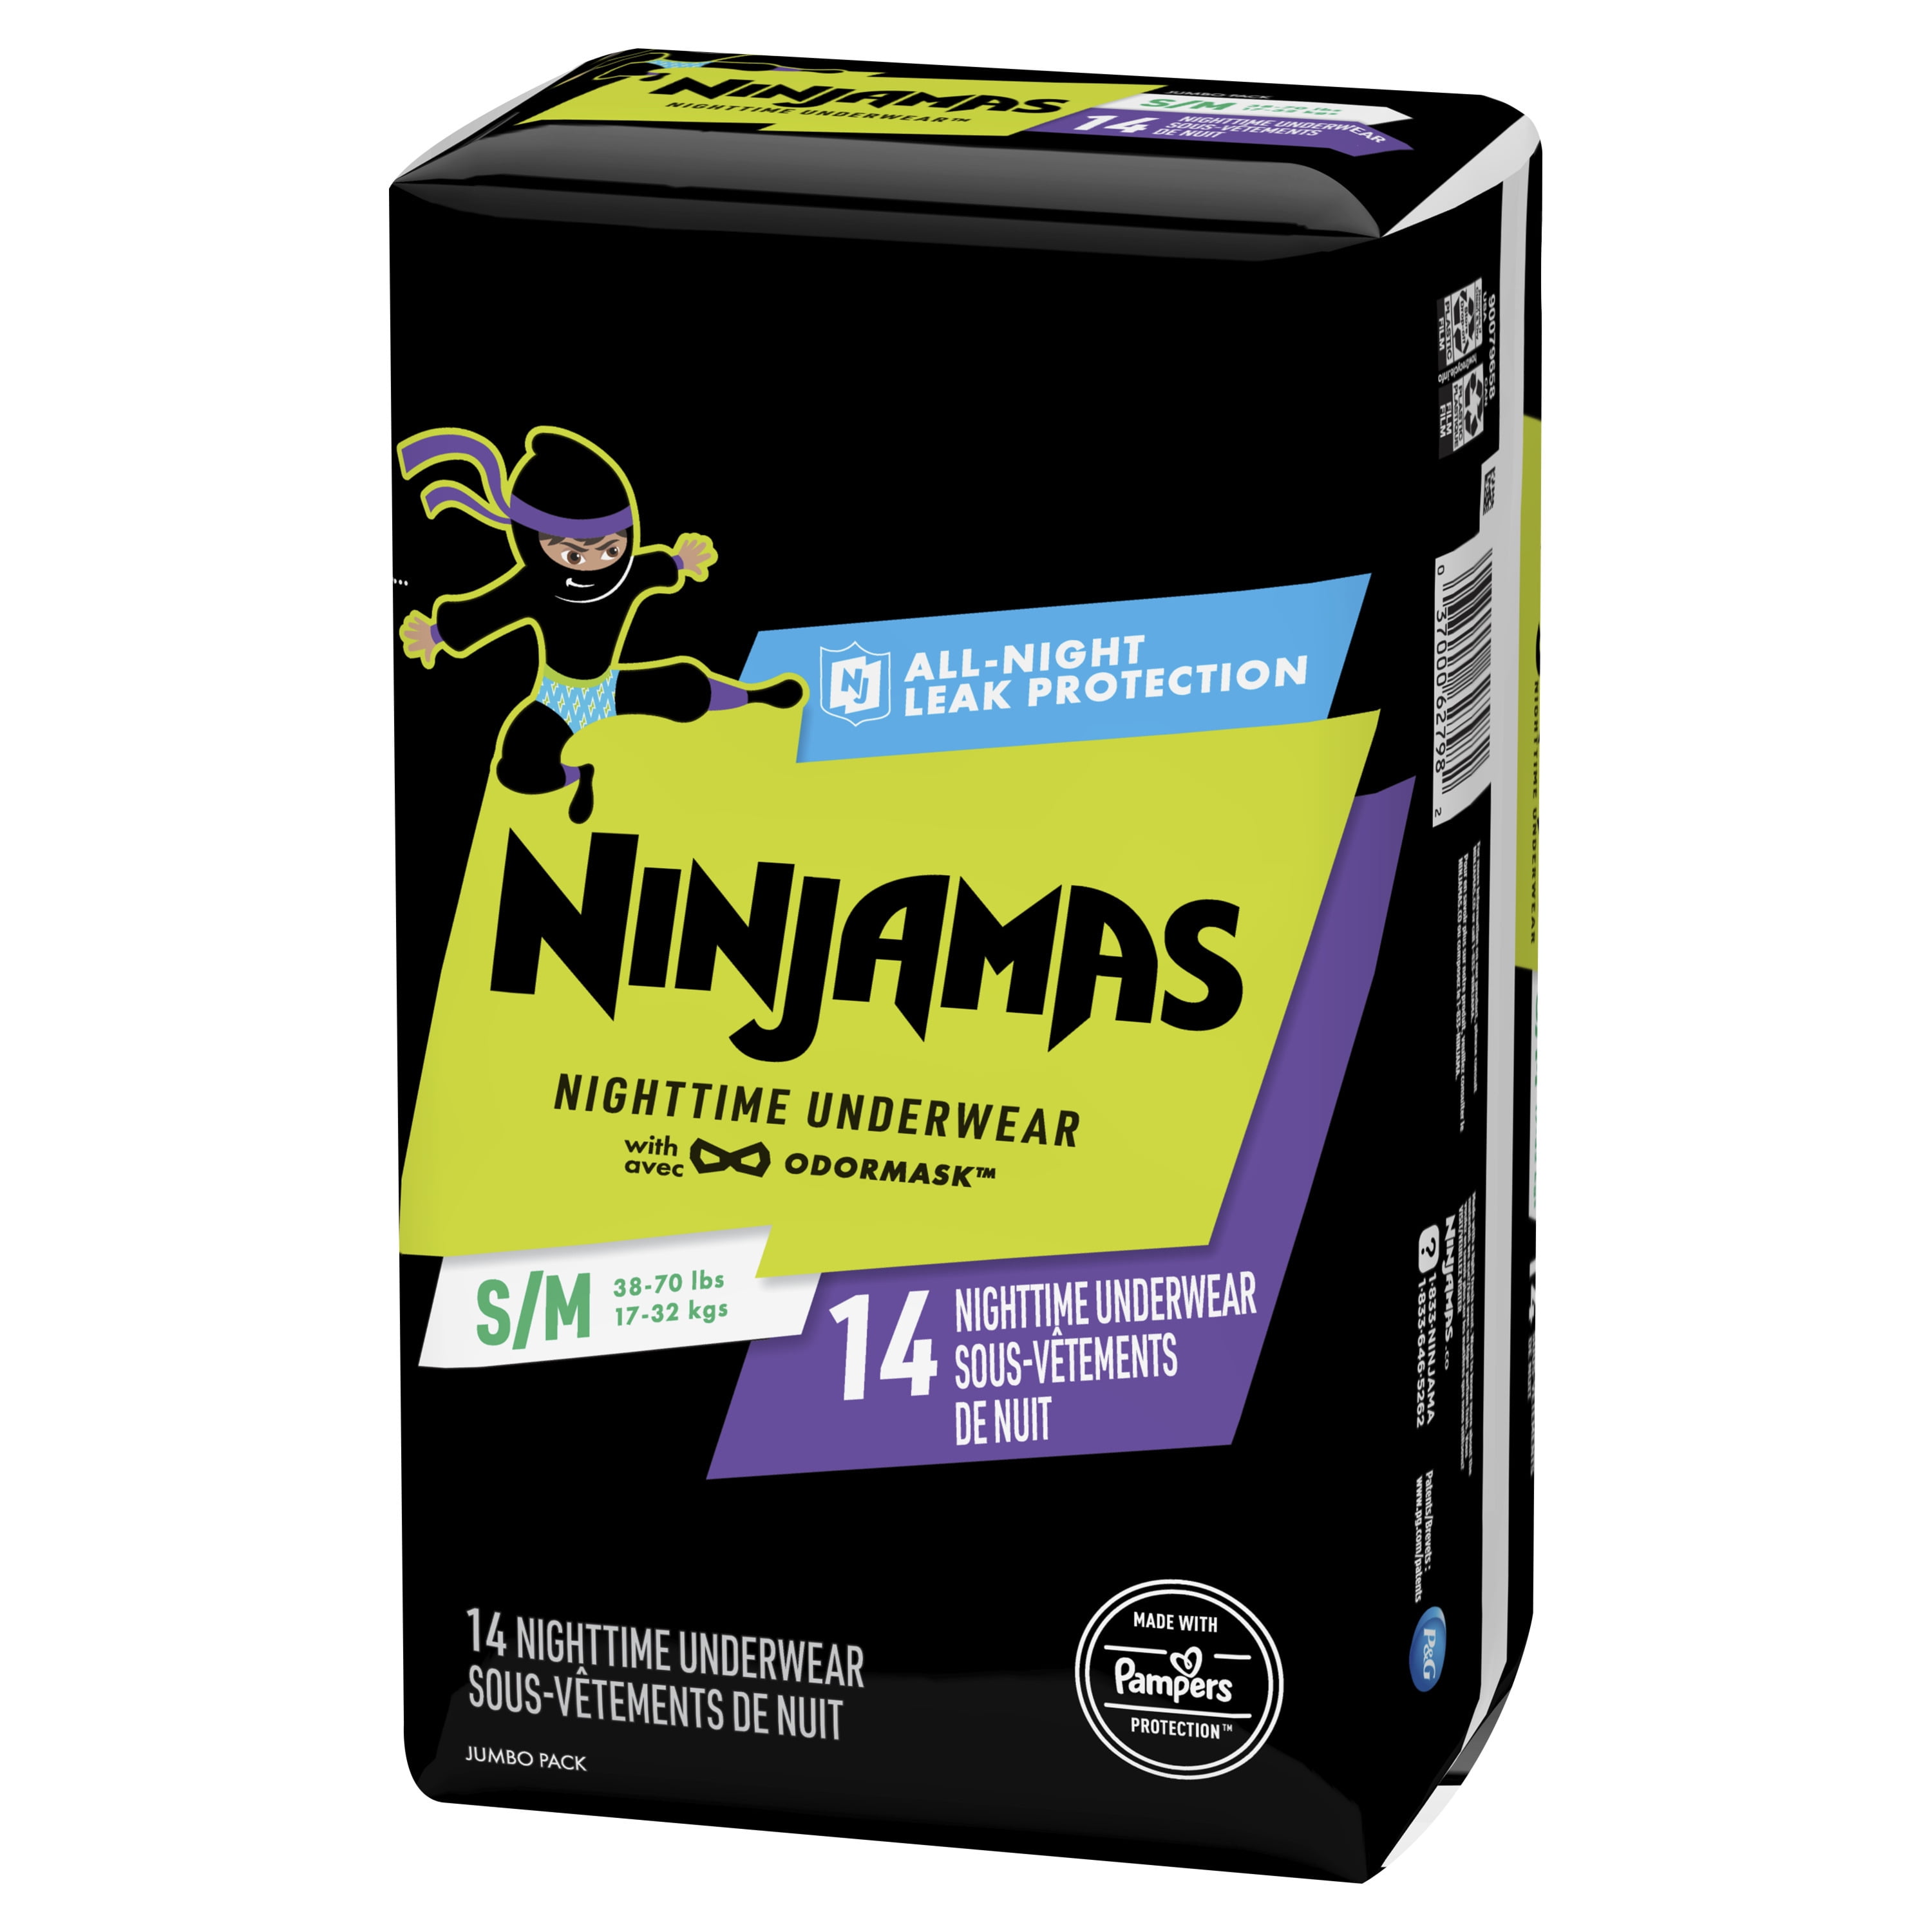 Pampers Ninjamas Nighttime Bedwetting Underwear Boys Size S/M (38-65 lbs)  14 Count (Packaging & Prints May Vary) (Pack of 2)